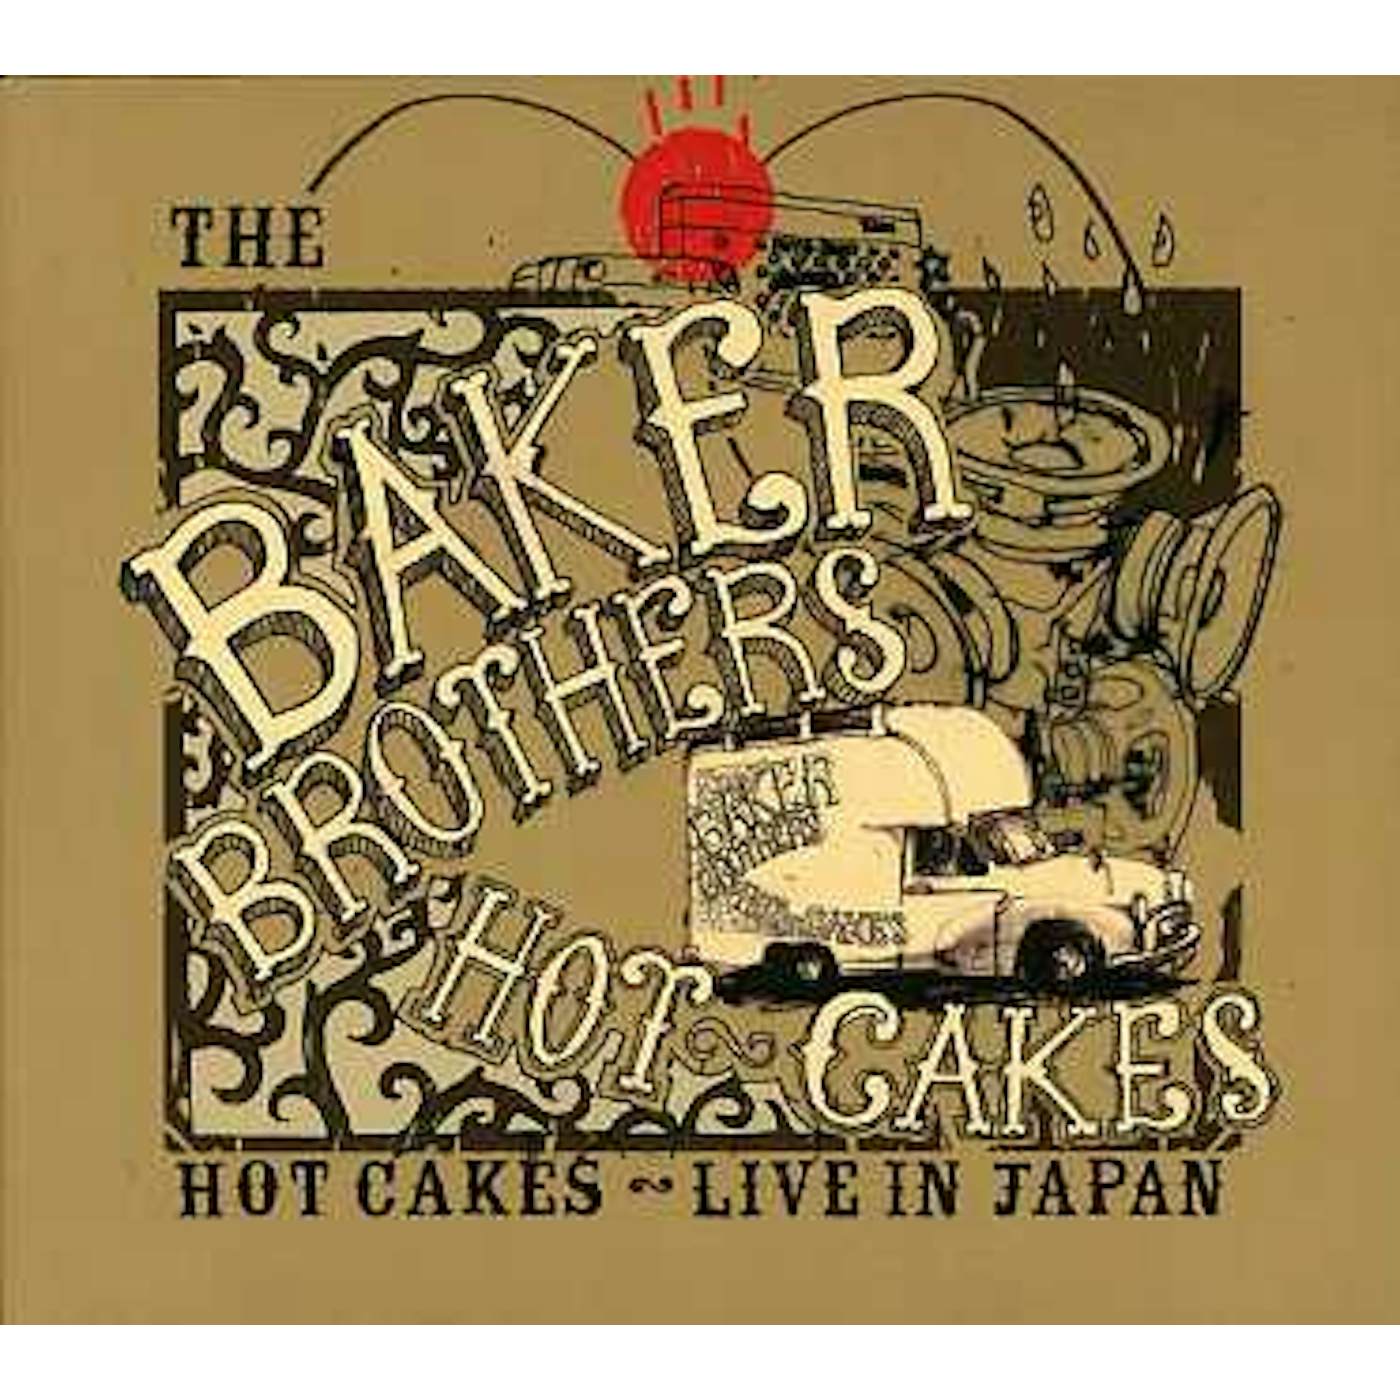 Baker Brothers HOT CAKES: LIVE IN JAPAN CD